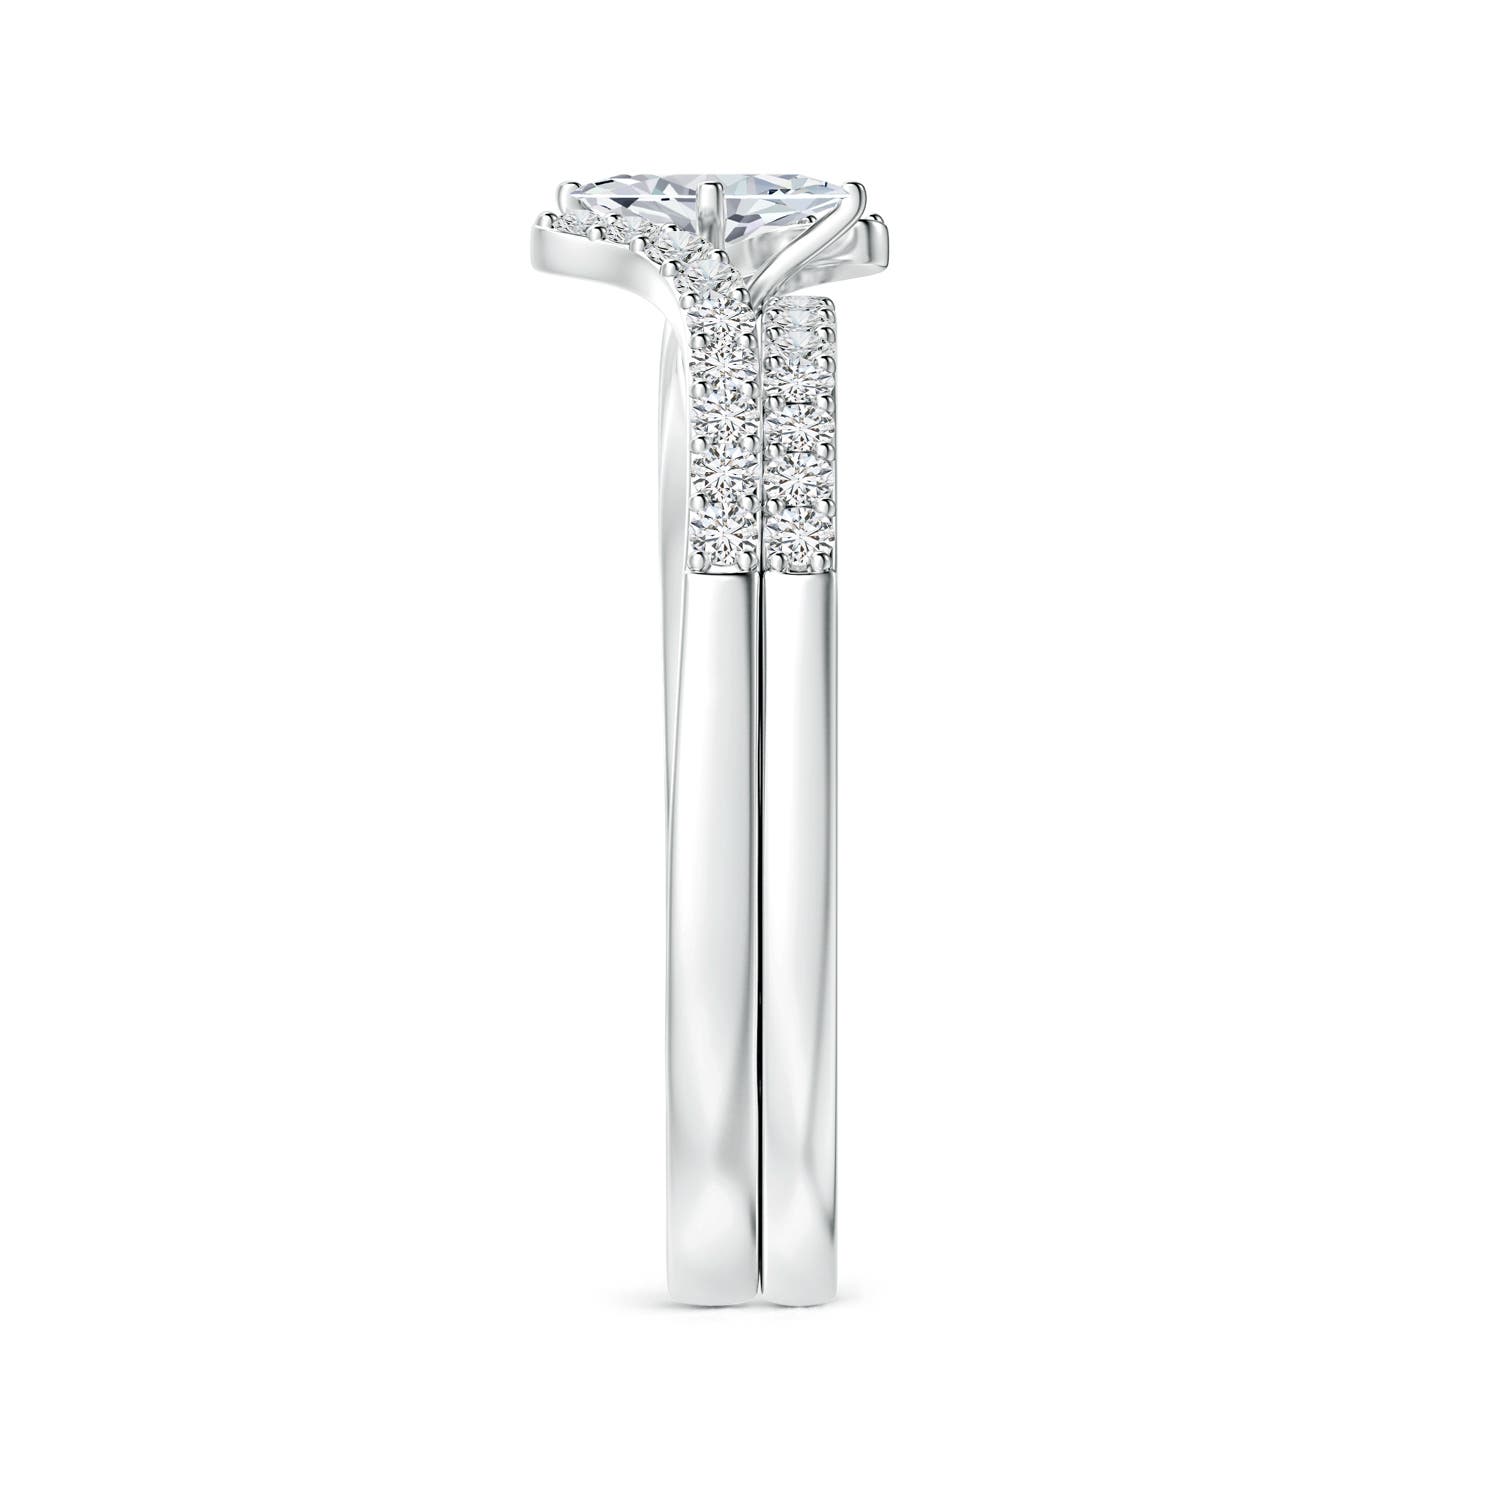 H, SI2 / 0.63 CT / 14 KT White Gold